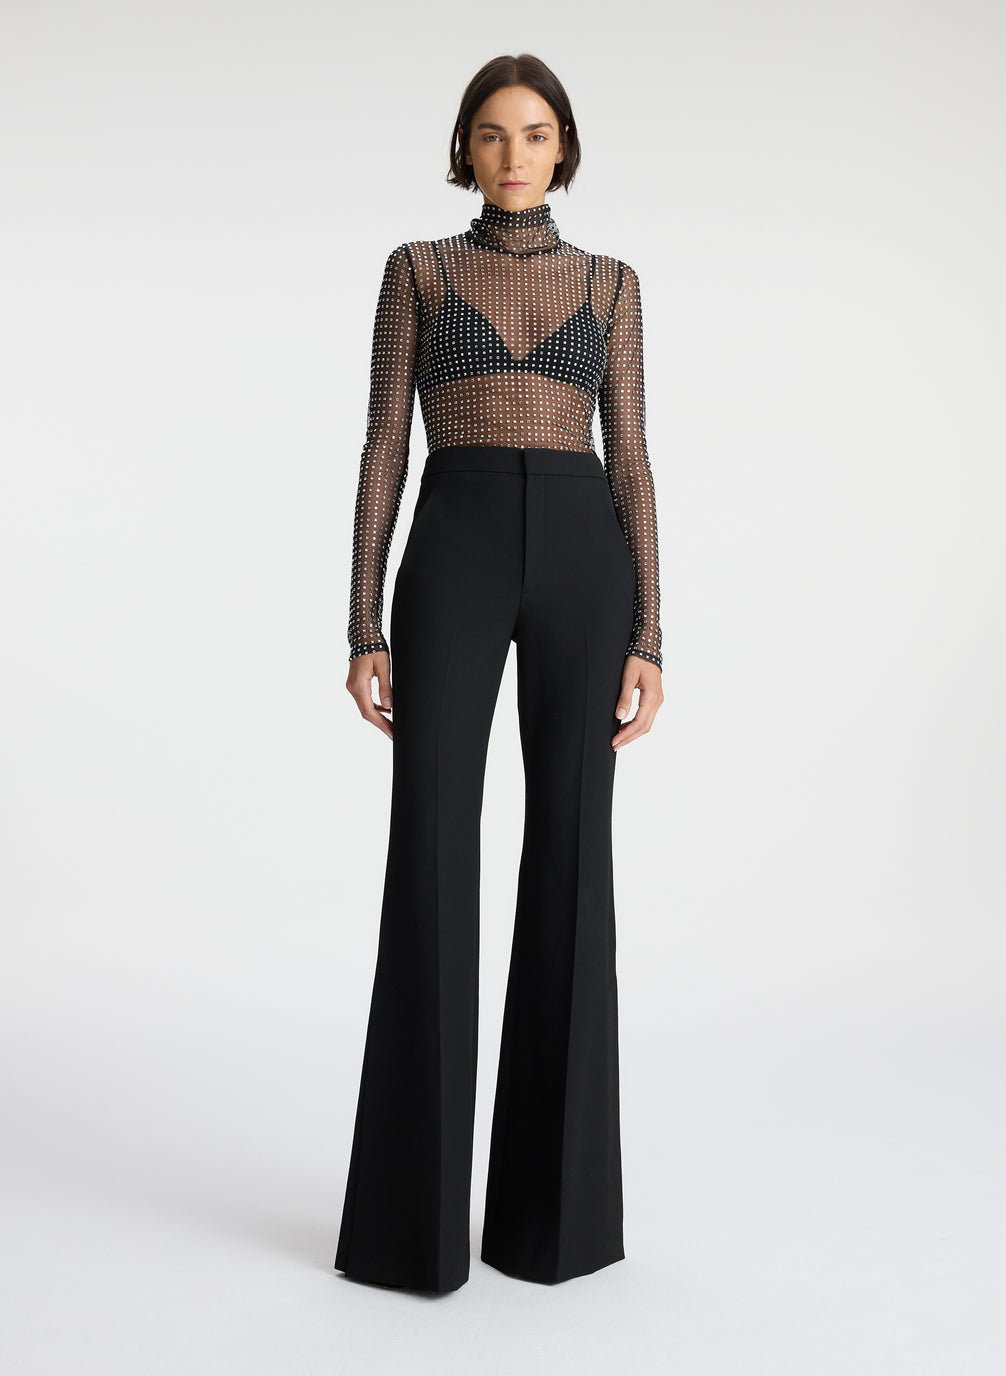 front view of woman wearing sheer black mock neck long sleeve with allover rhinestone embellishment and black pants